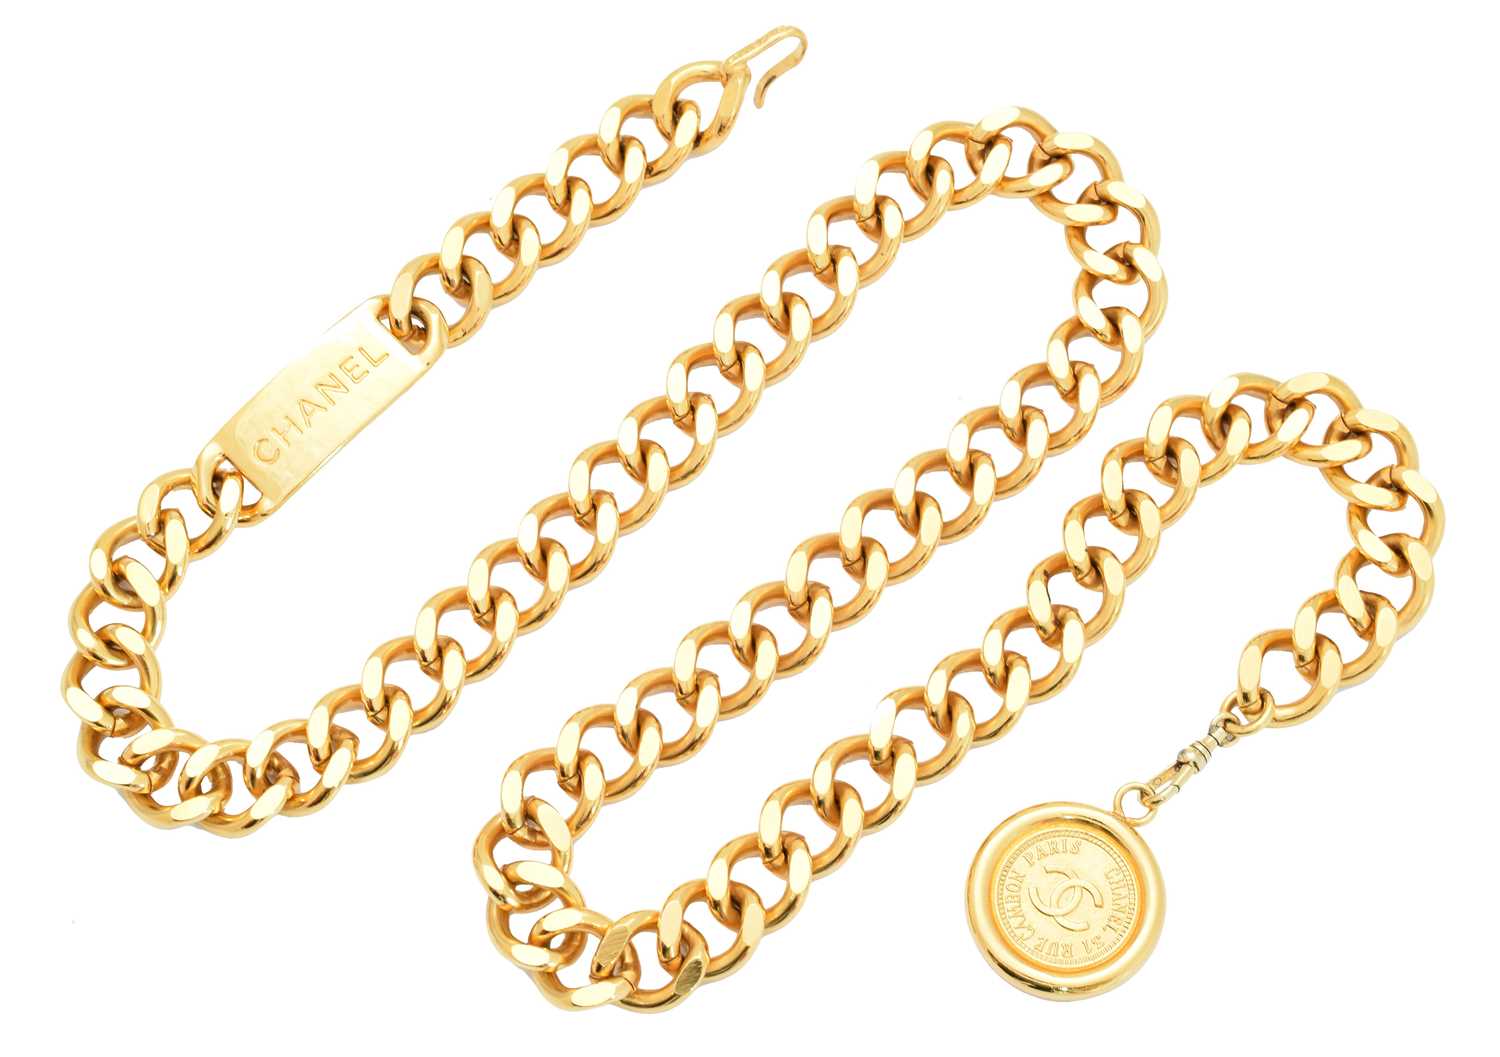 Lot 56 - A Chanel Rue Cambon belt necklace